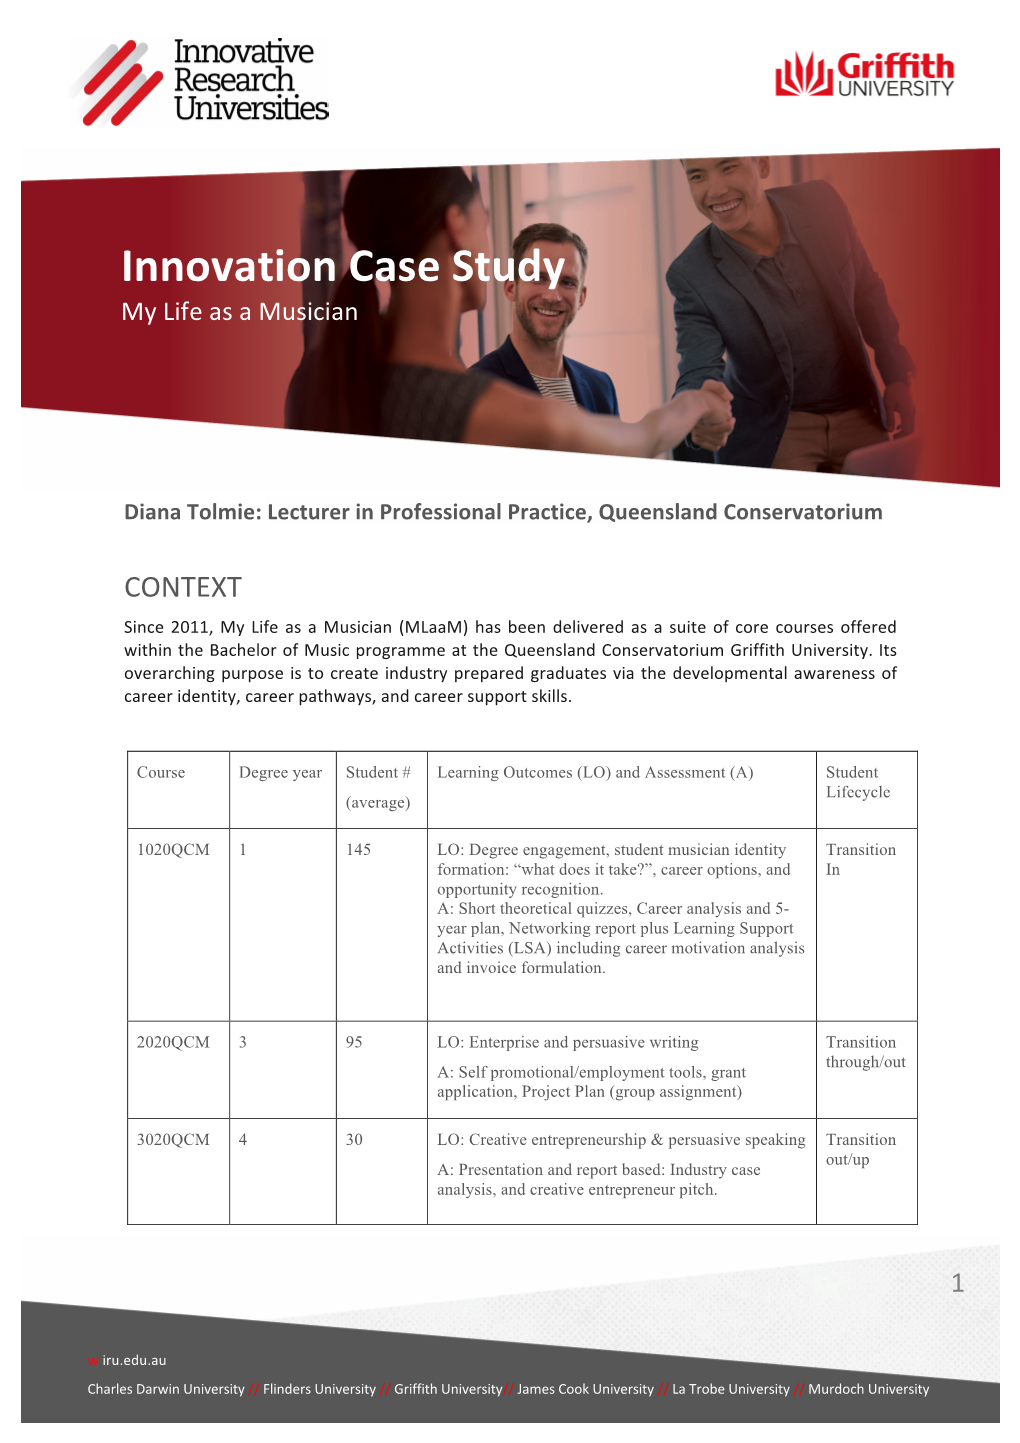 Innovation Case Study My Life As a Musician